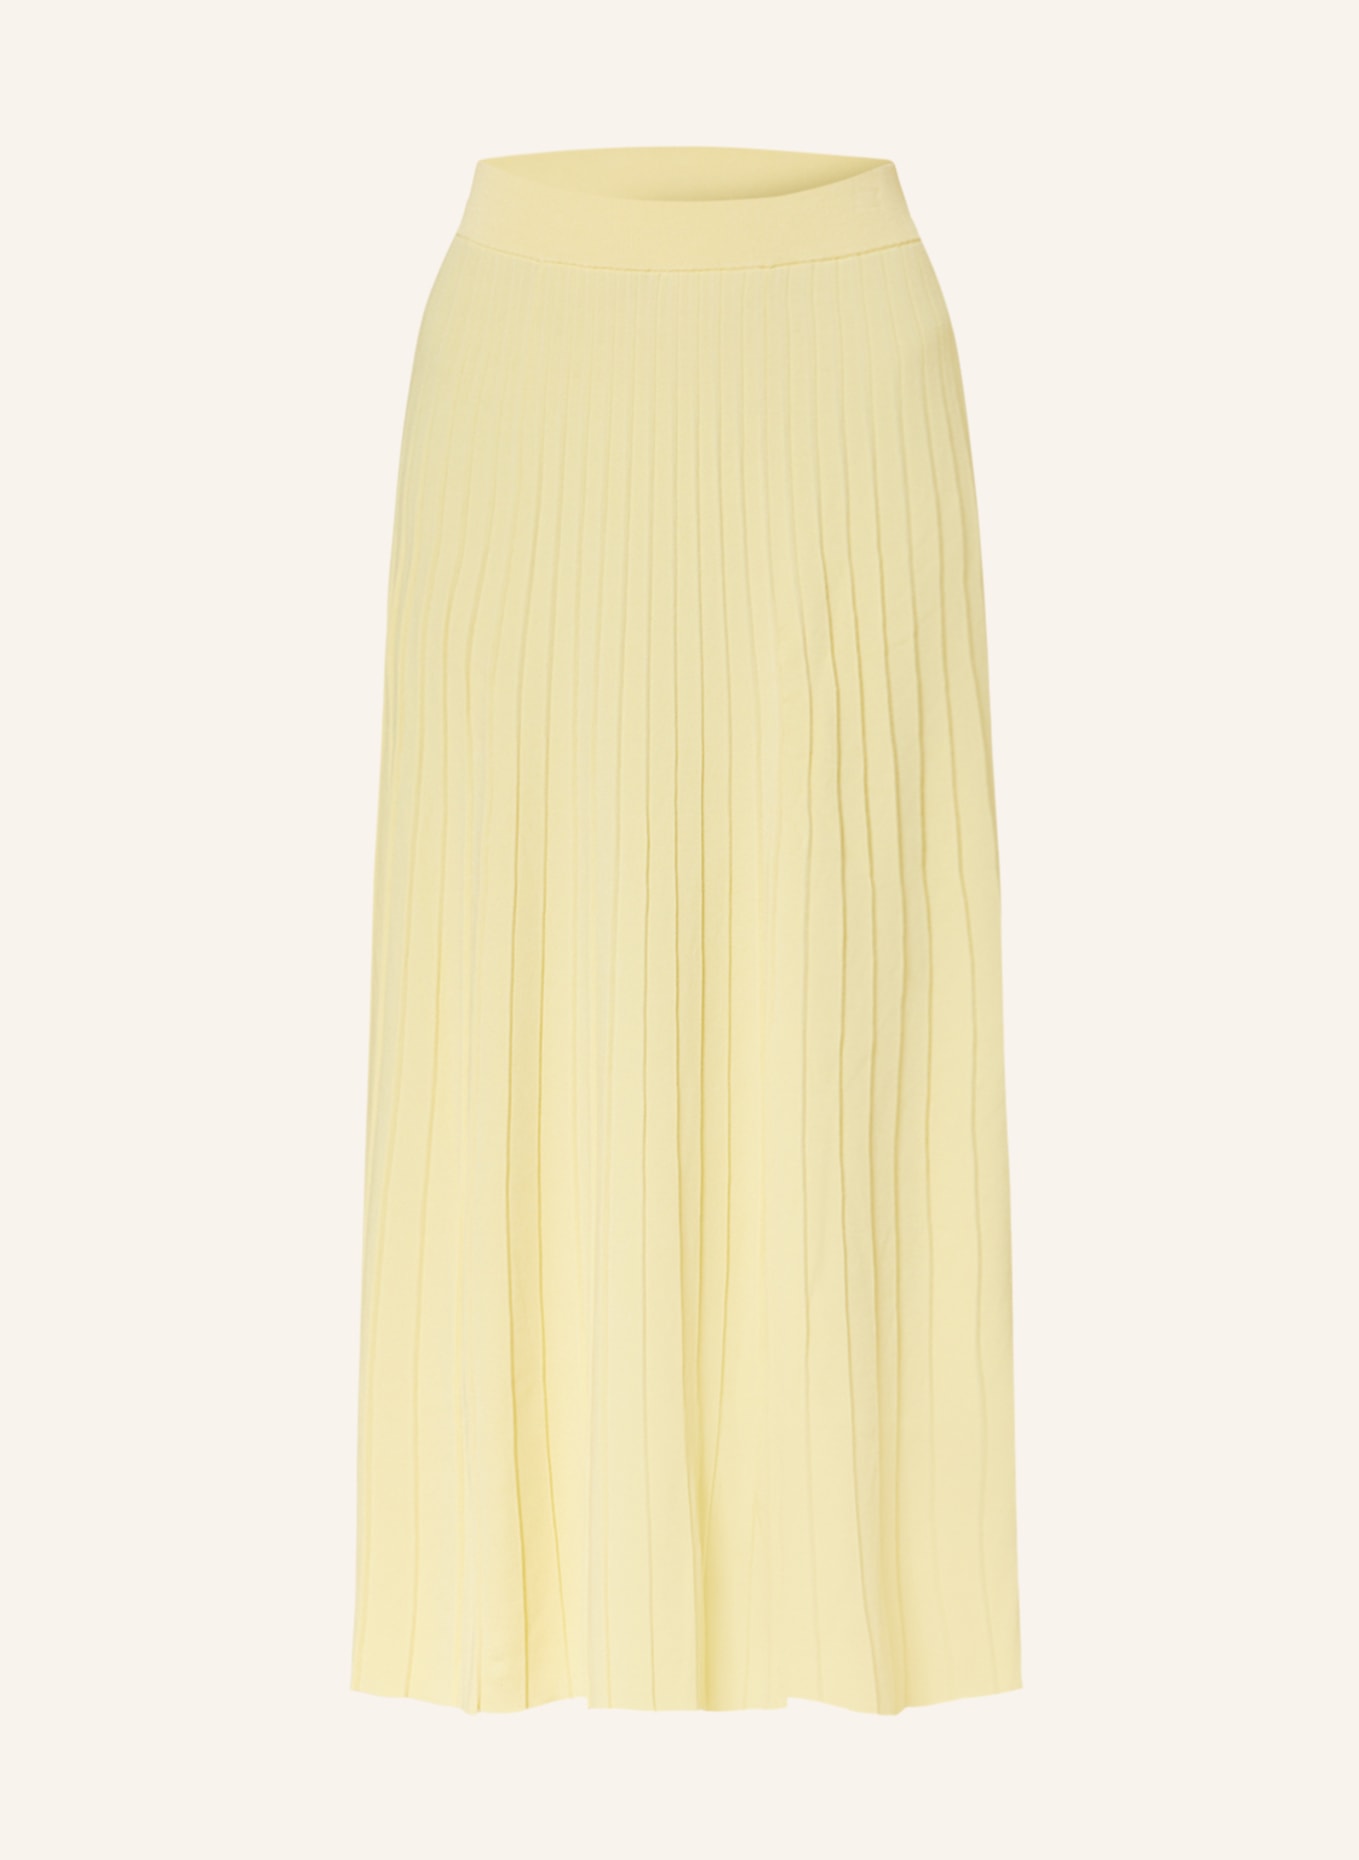 COS Knit skirt, Color: LIGHT YELLOW (Image 1)